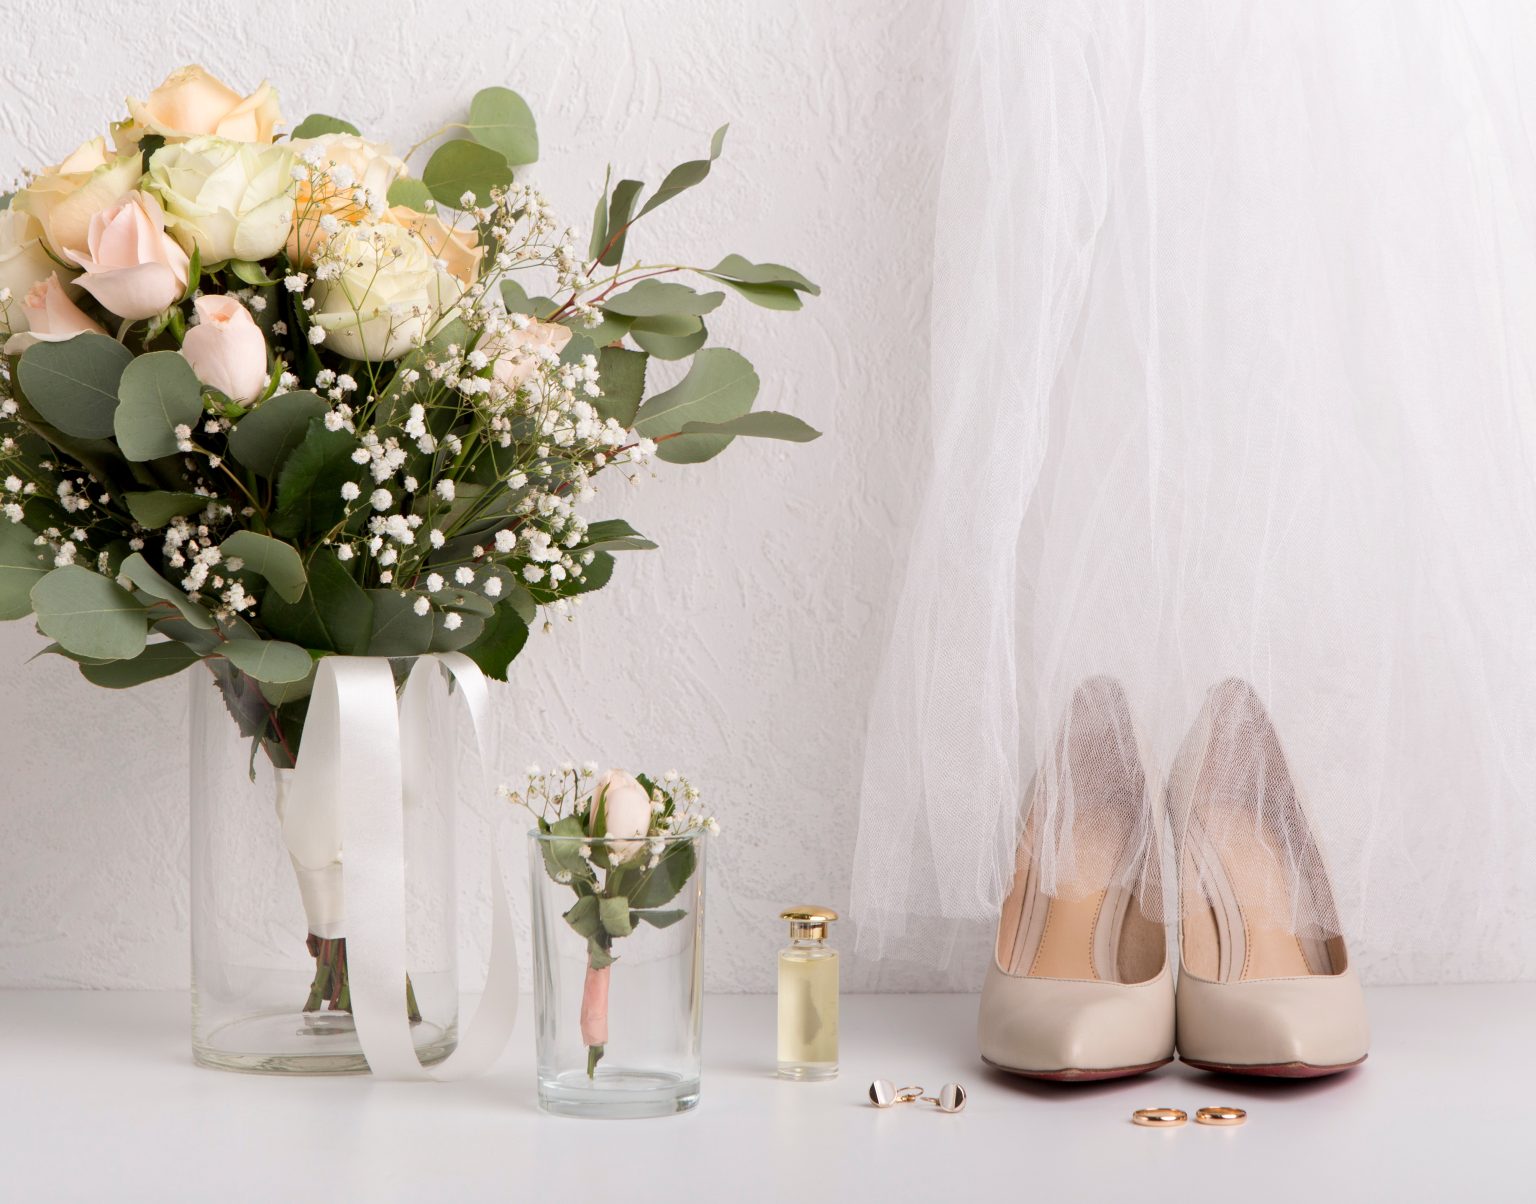 This image contains bridal flowers, shoes, perfume and jewellery. Feature image for Bridal Accessories